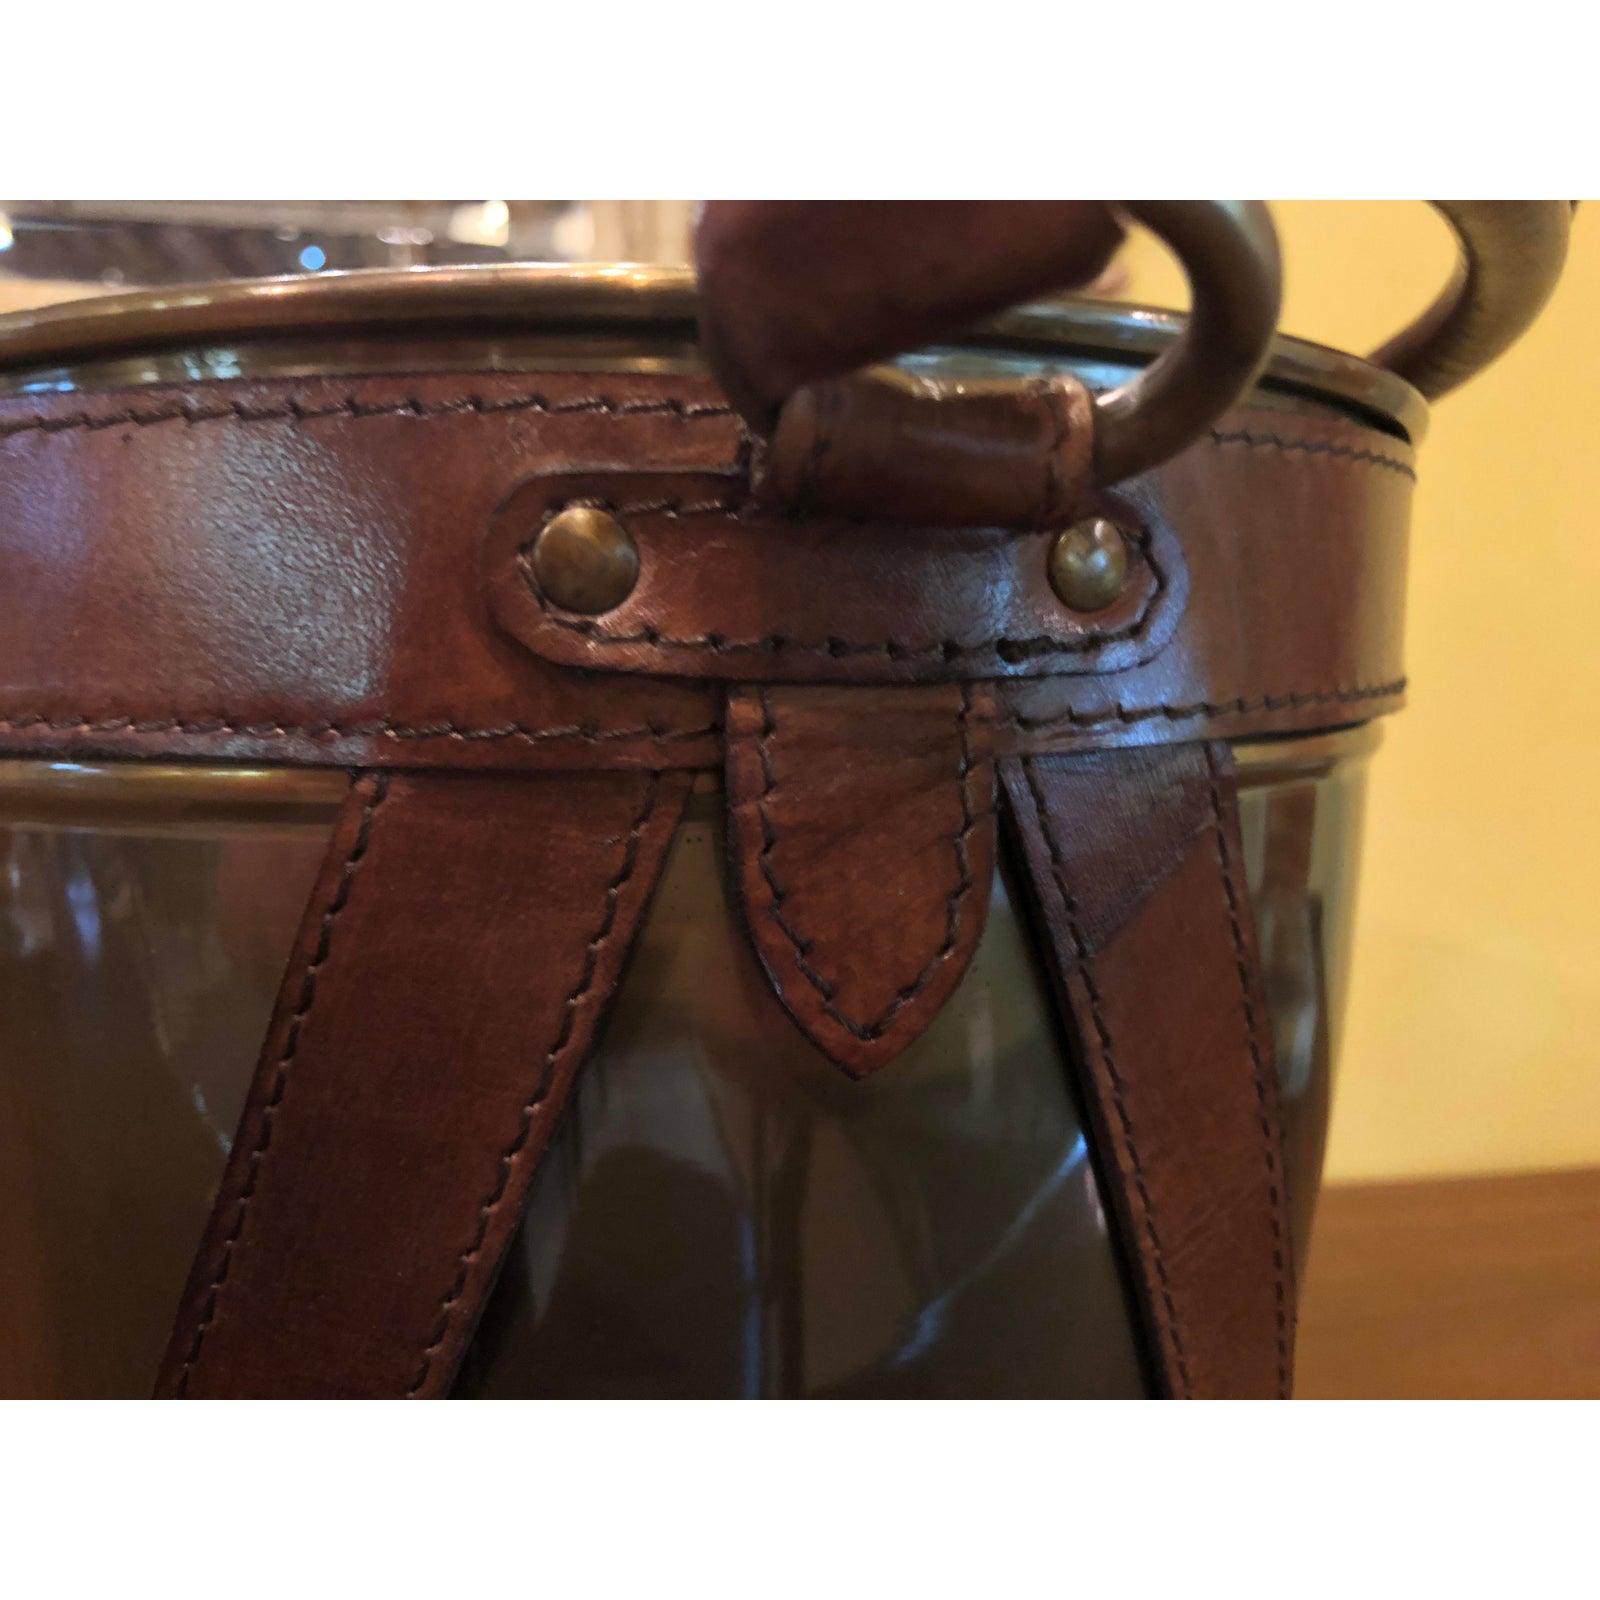 Leather handle midcentury style champagne ice bucket
Handsome Midcentury style modern ice bucket decorated with leather stripes and leather handle. An eye catching piece.